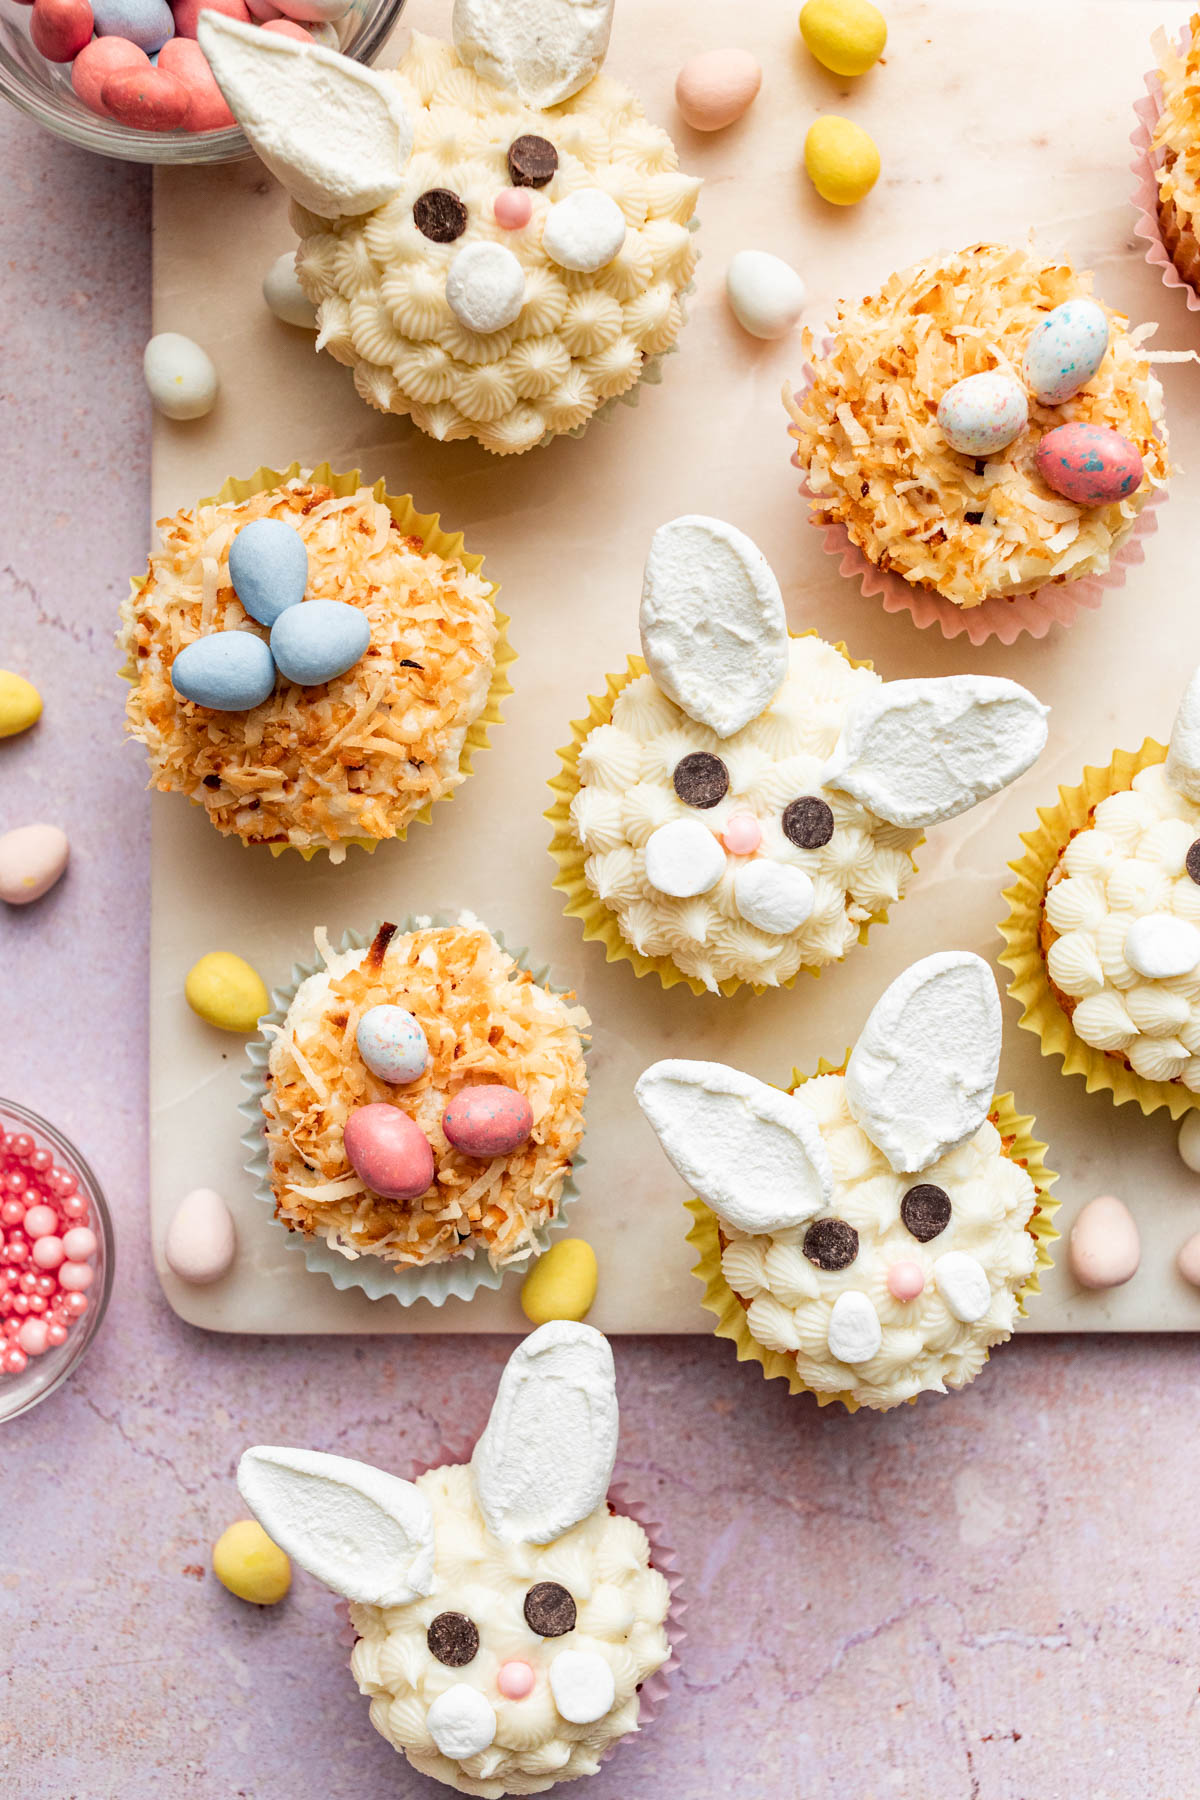 An assortment of Easter cupcakes on amarble board with chocolate eggs and sprinkles nearby.